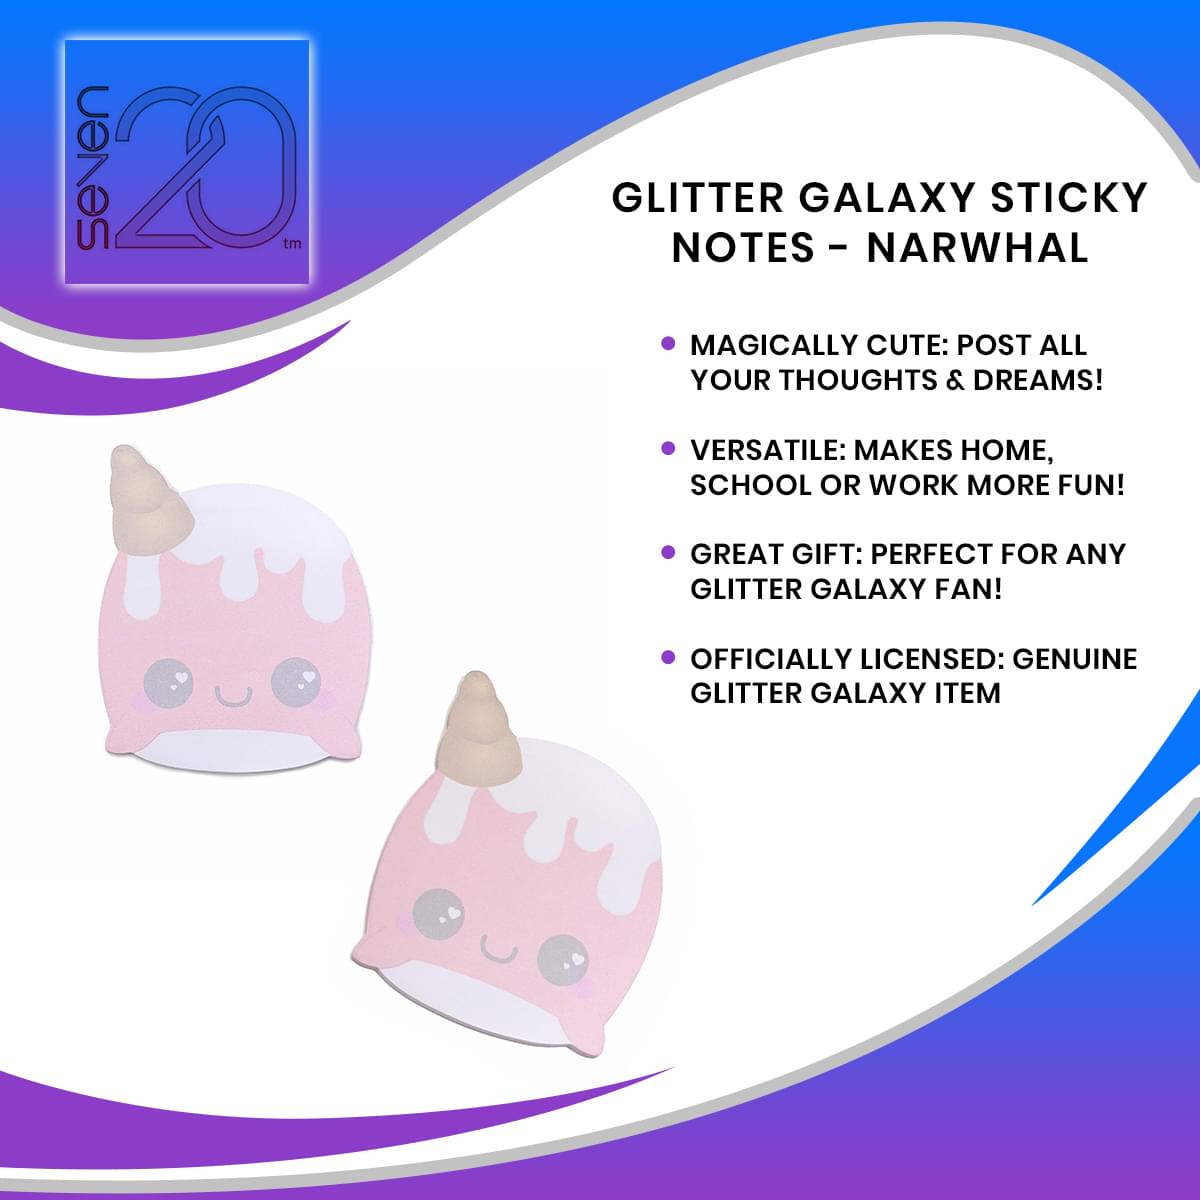 Glitter Galaxy Sticky Notes - Narwhal